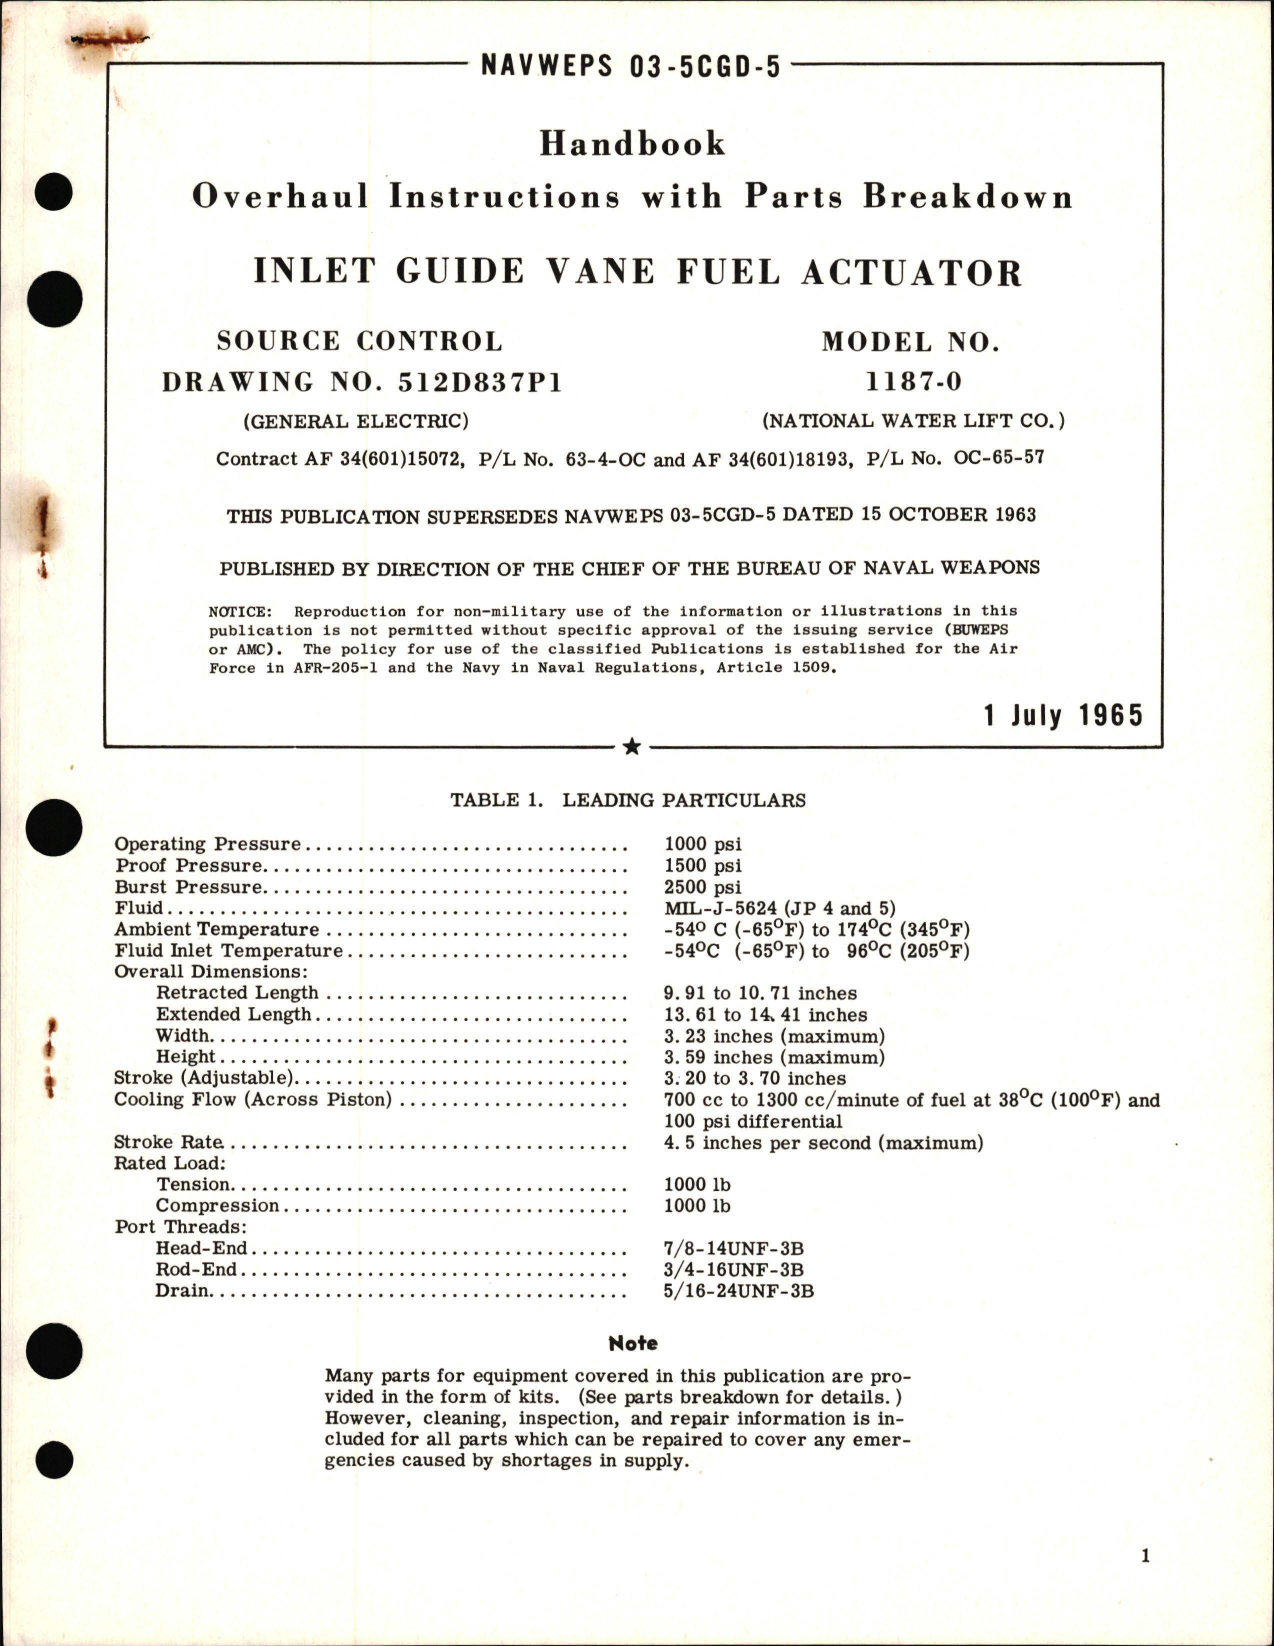 Sample page 1 from AirCorps Library document: Overhaul Instructions with Parts Breakdown for Inlet Guide Vane Fuel Actuator - Model 1187-0 